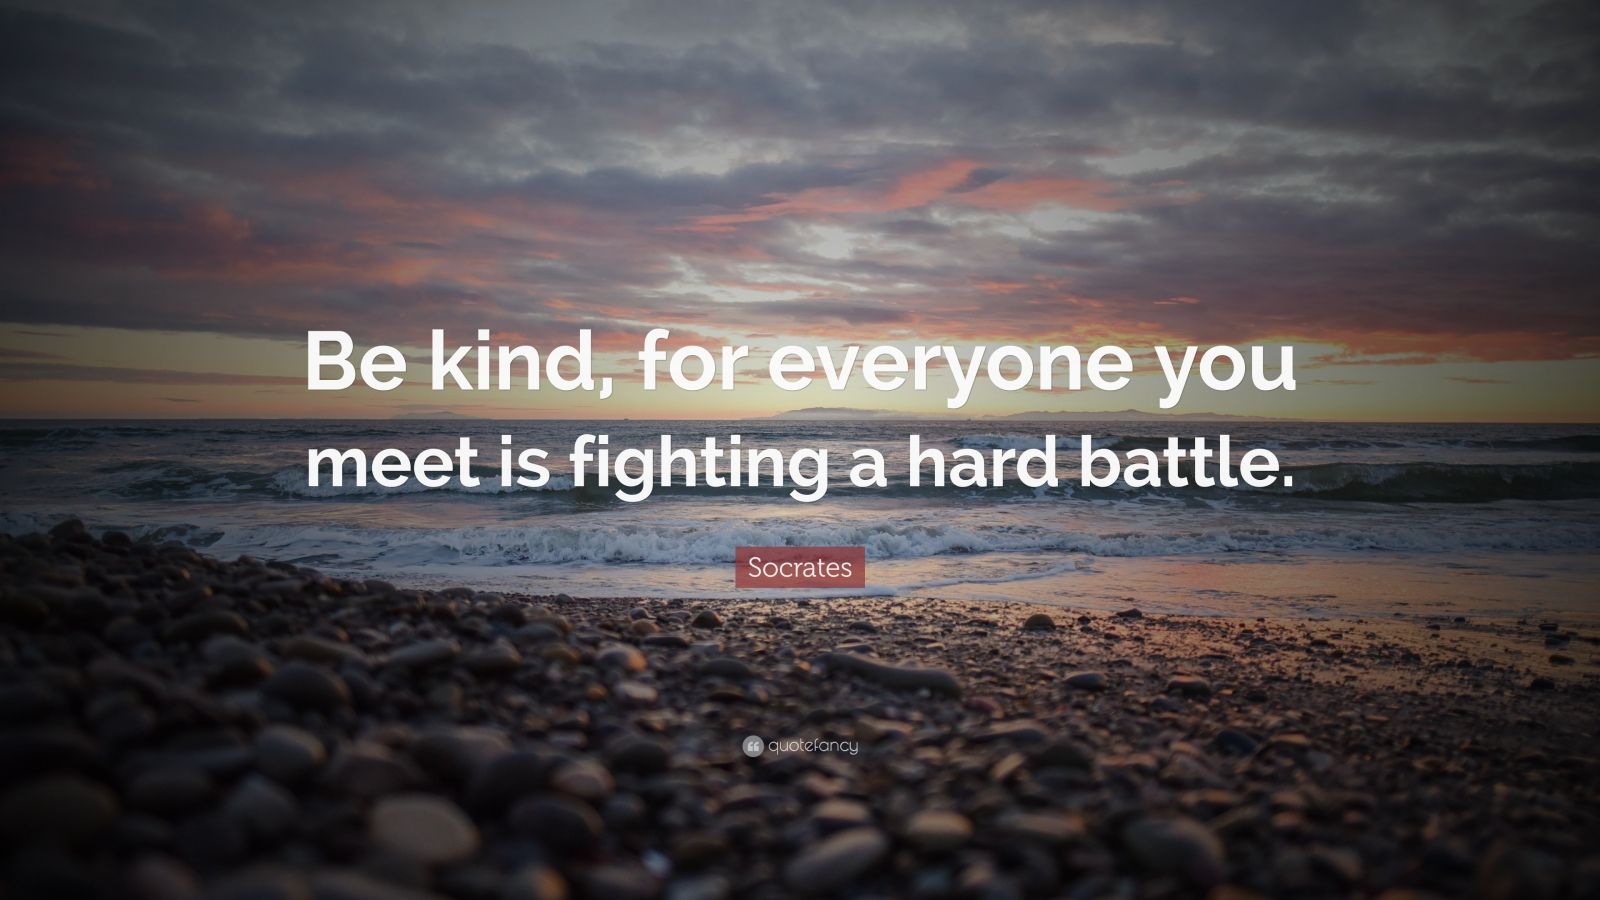 25843 Socrates Quote Be kind for everyone you meet is fighting a hard